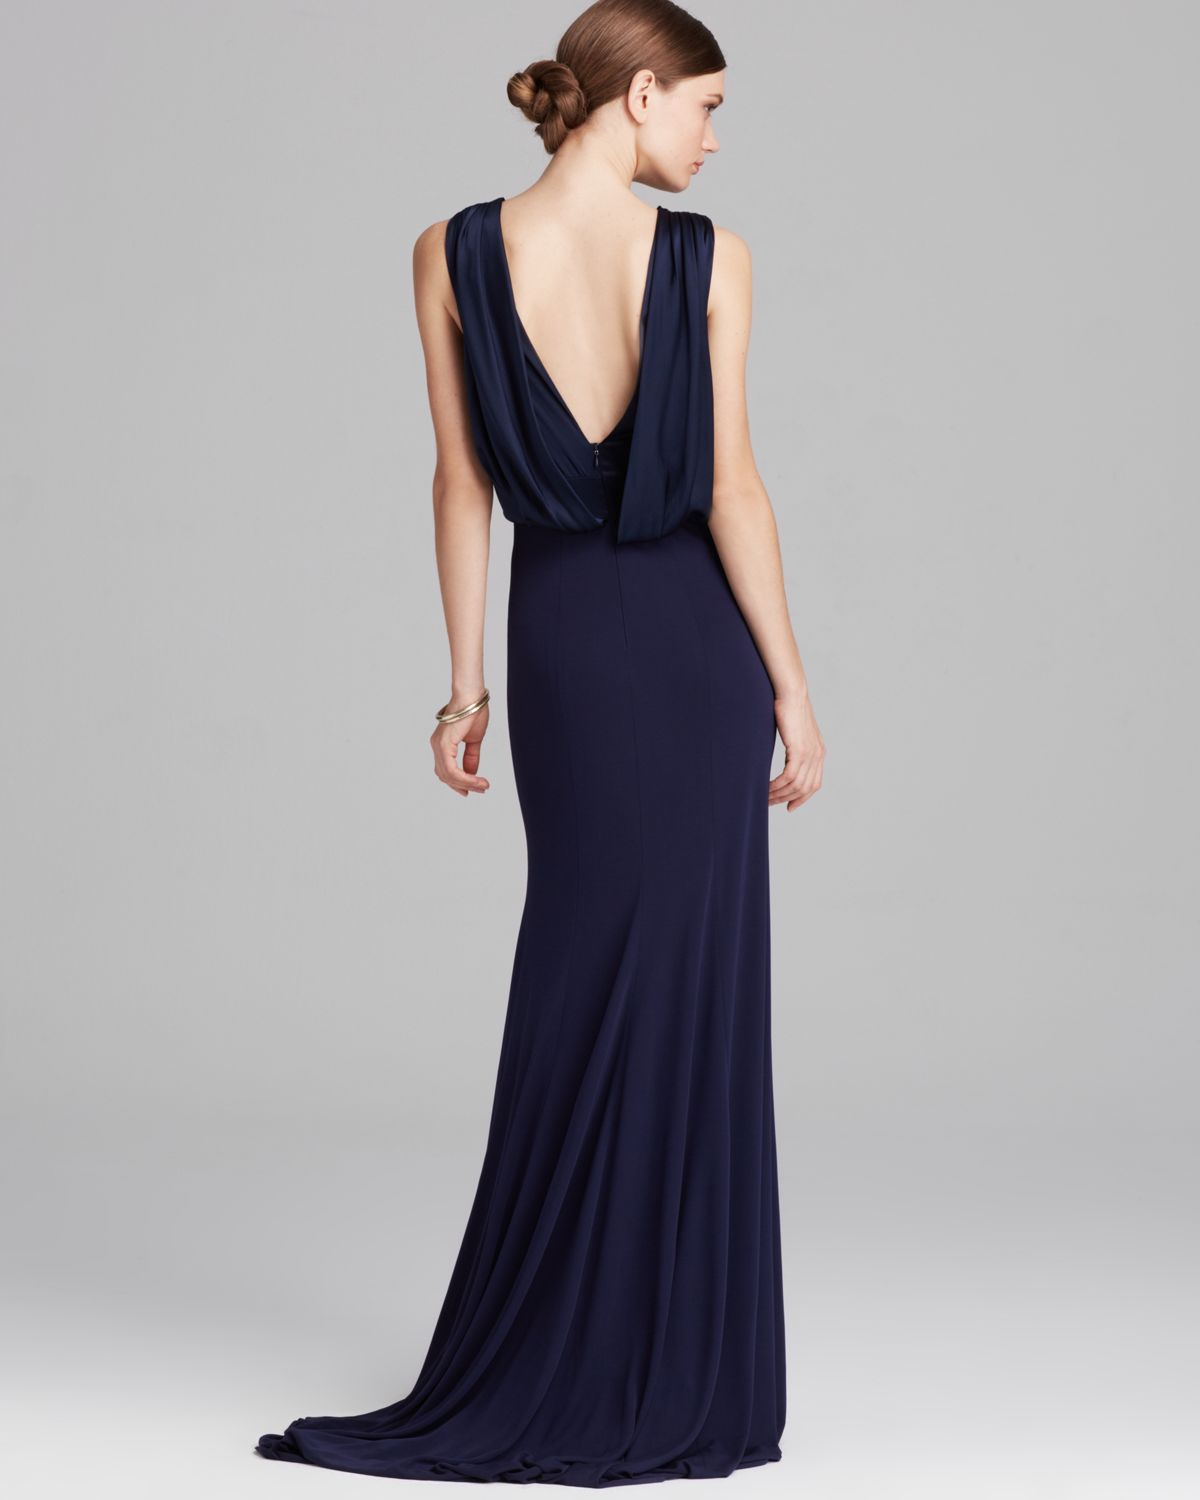 Lyst - Vera Wang Gown Sleeveless Deep V Shawl Back Jersey in Blue